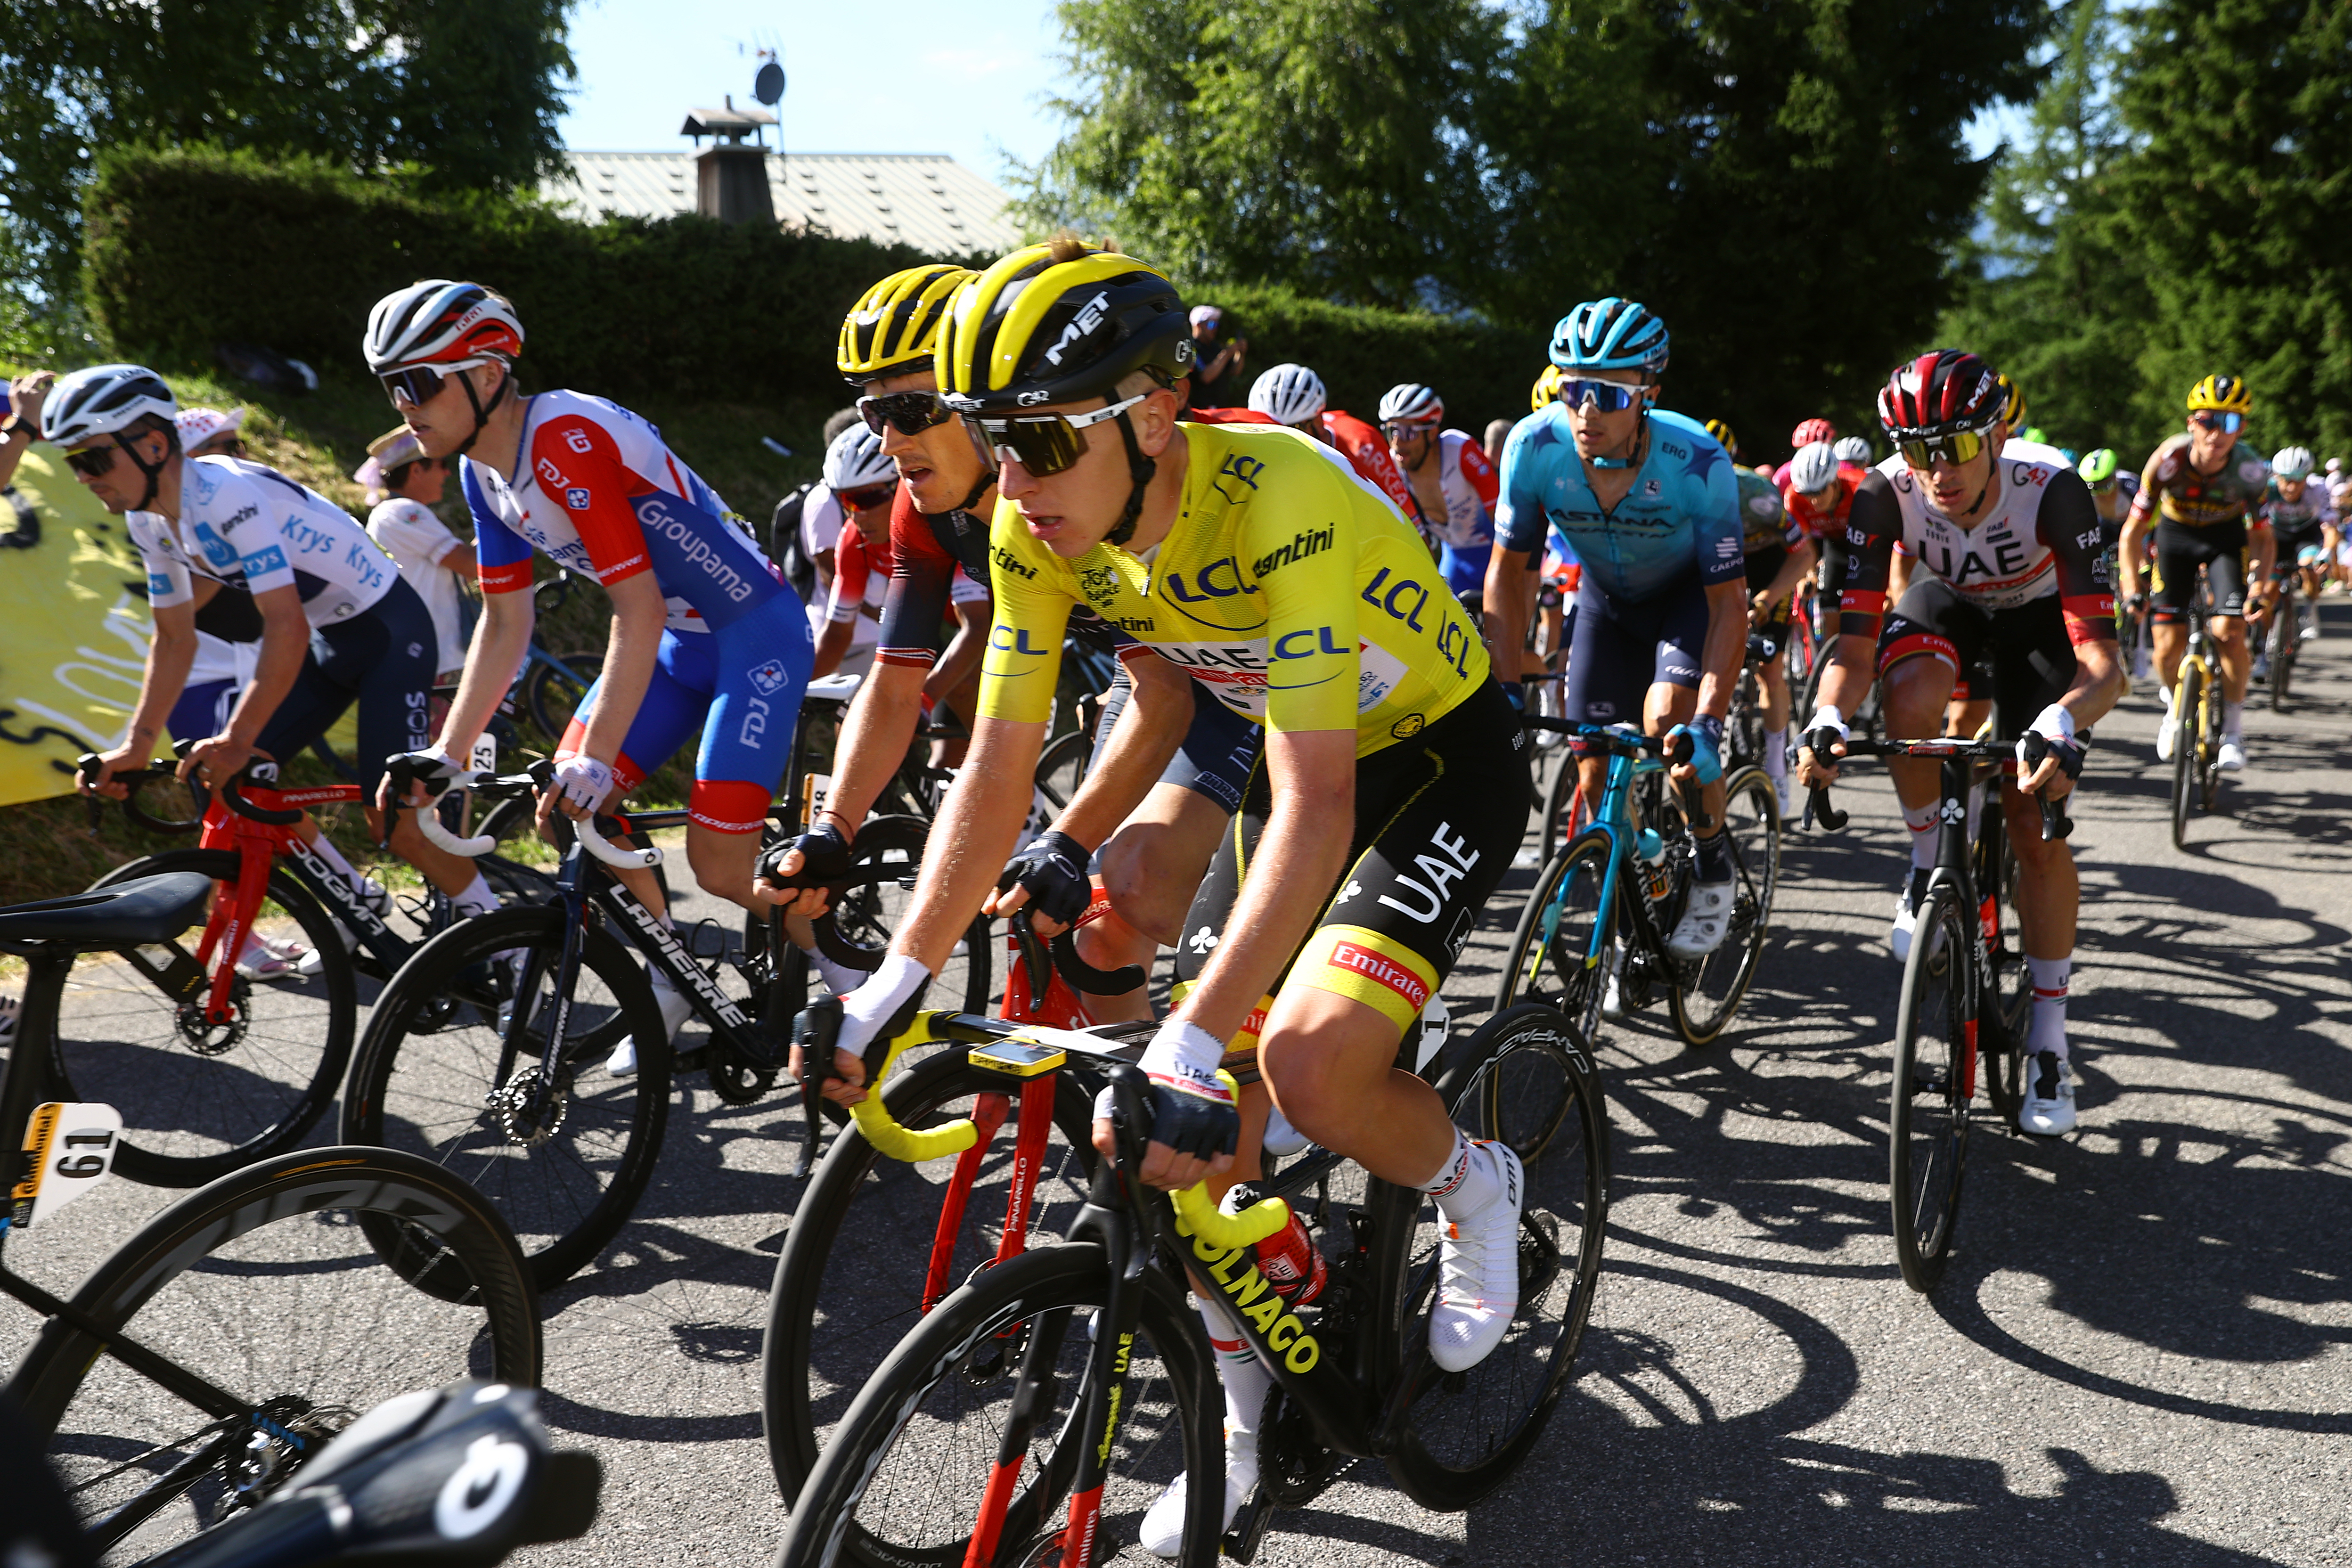 Tadej Pogacar of Slovenia and UAE Team Emirates - Yellow Leader Jersey competes during the 109th Tour de France 2022, Stage 10 a 148,1km stage from Morzine to Megève 1435m / #TDF2022 / #WorldTour / on July 12, 2022 in Megeve, France.